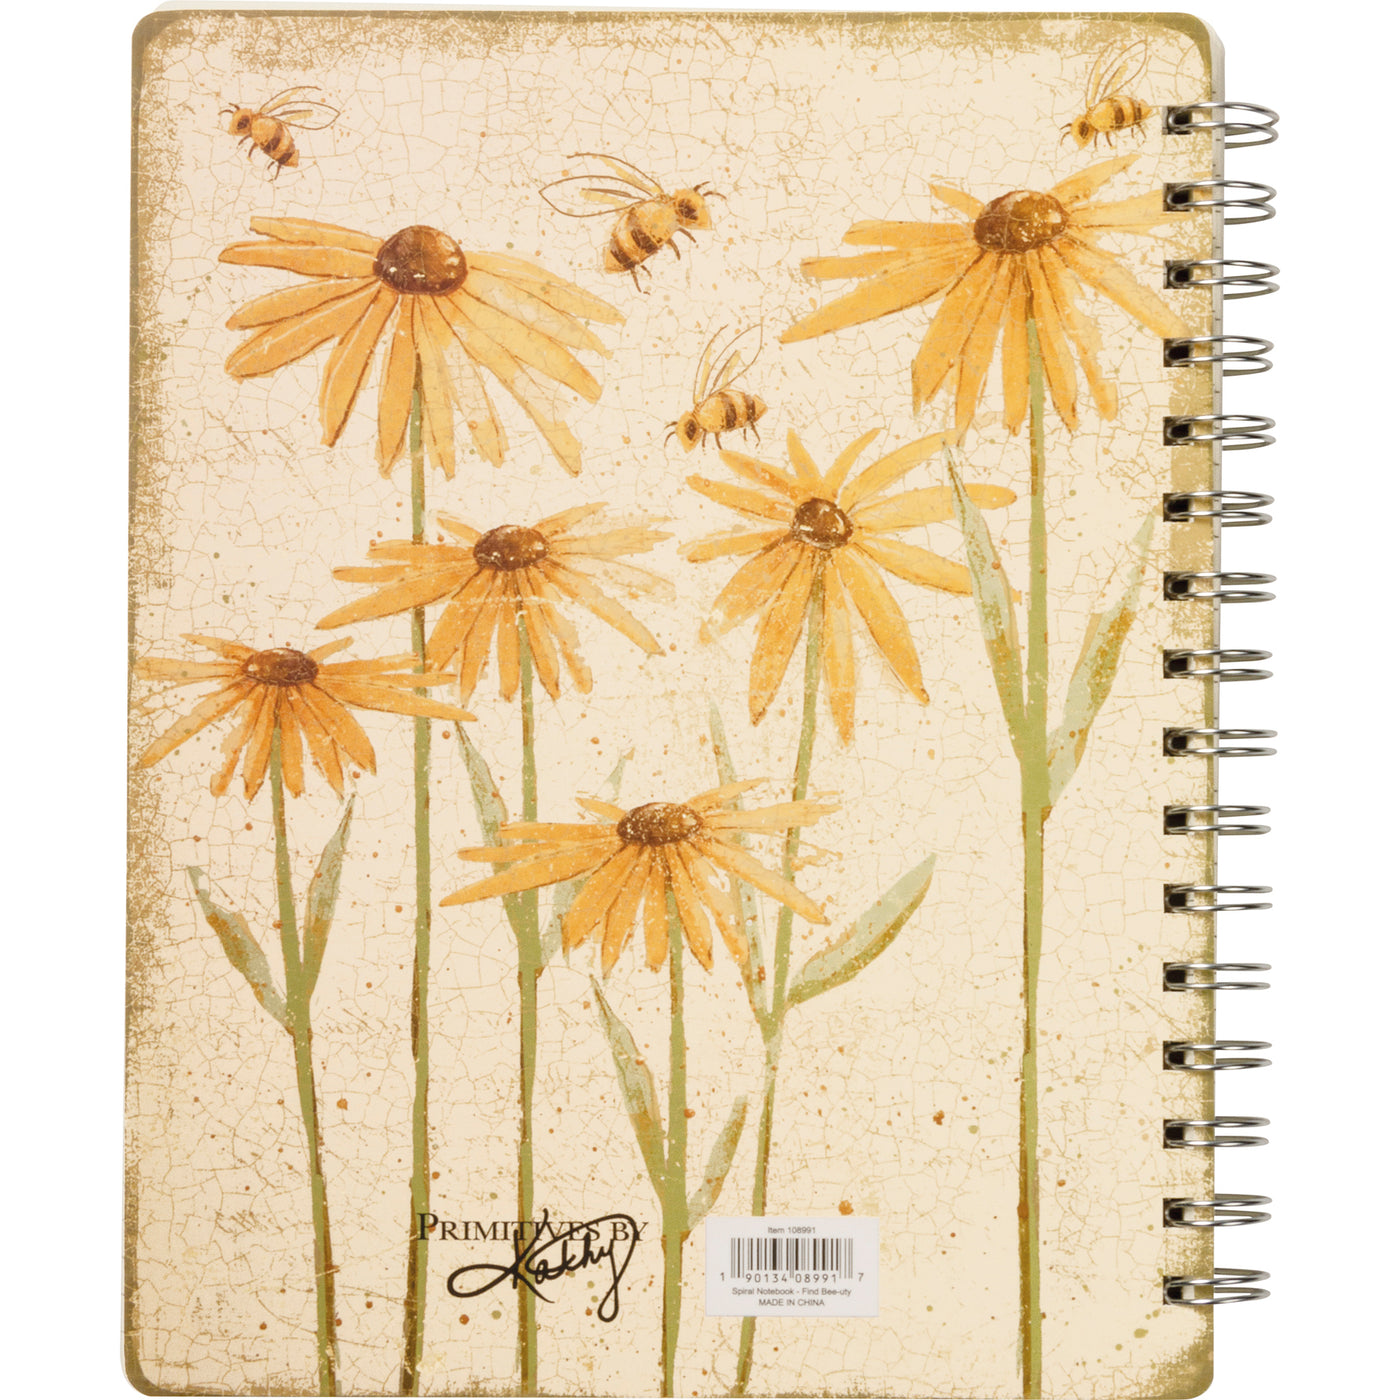 Find Bee-uty In Every Day Spiral Notebook